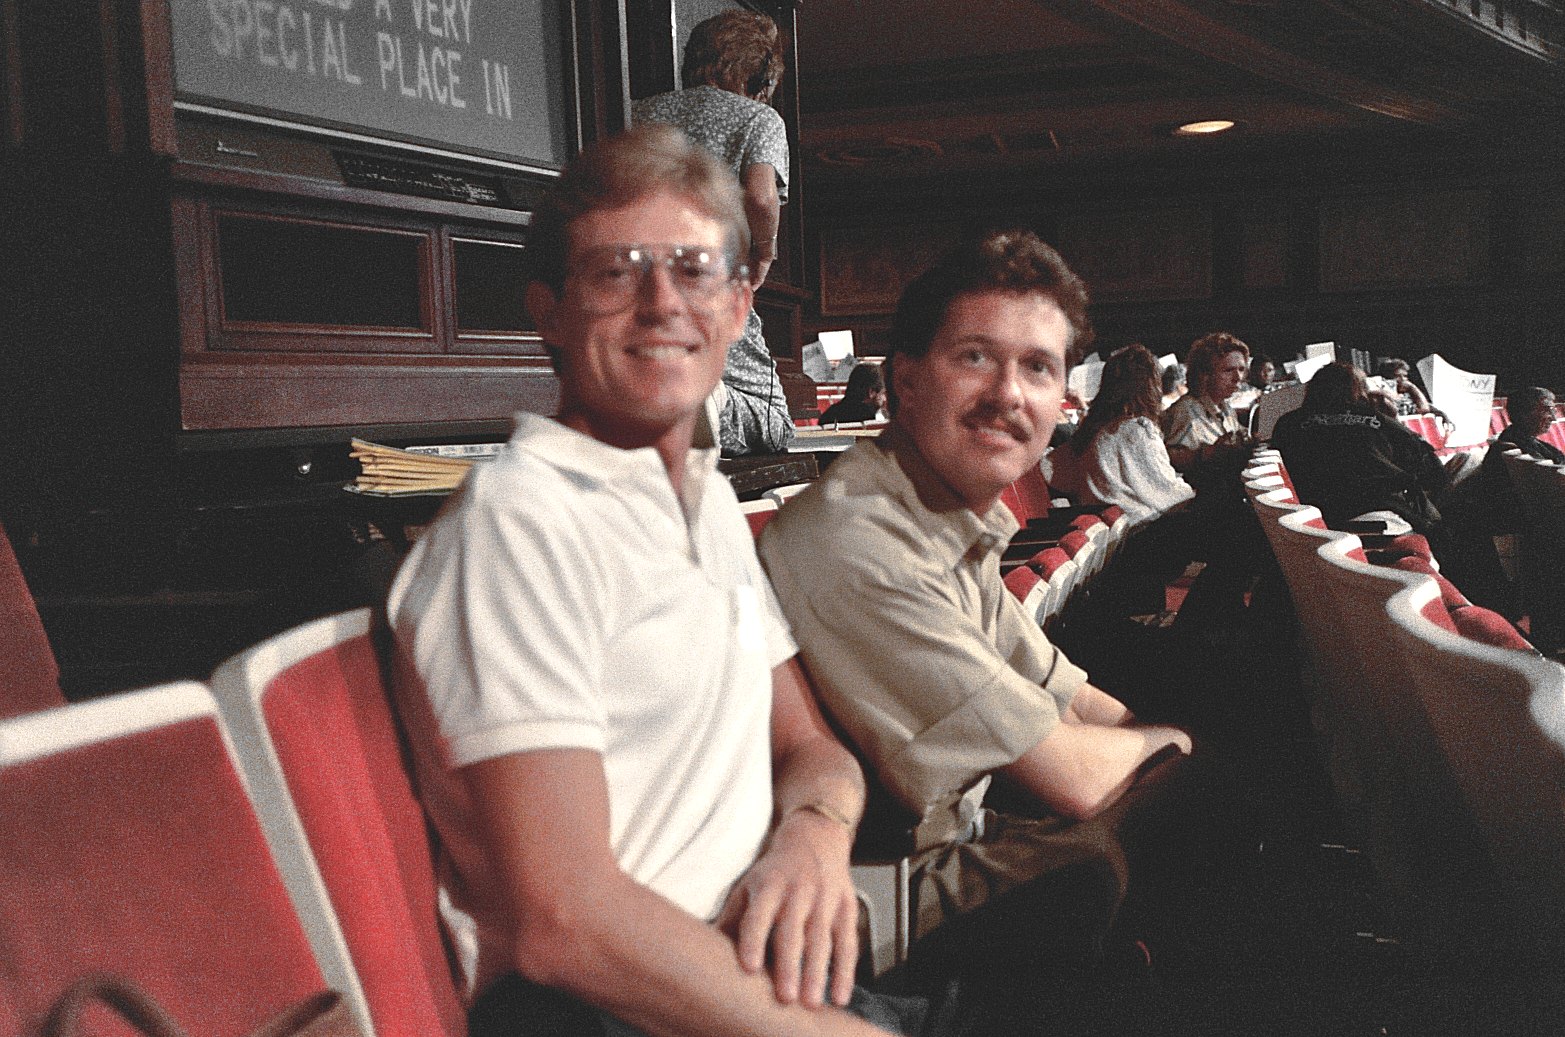 two men are sitting side by side in an auditorium